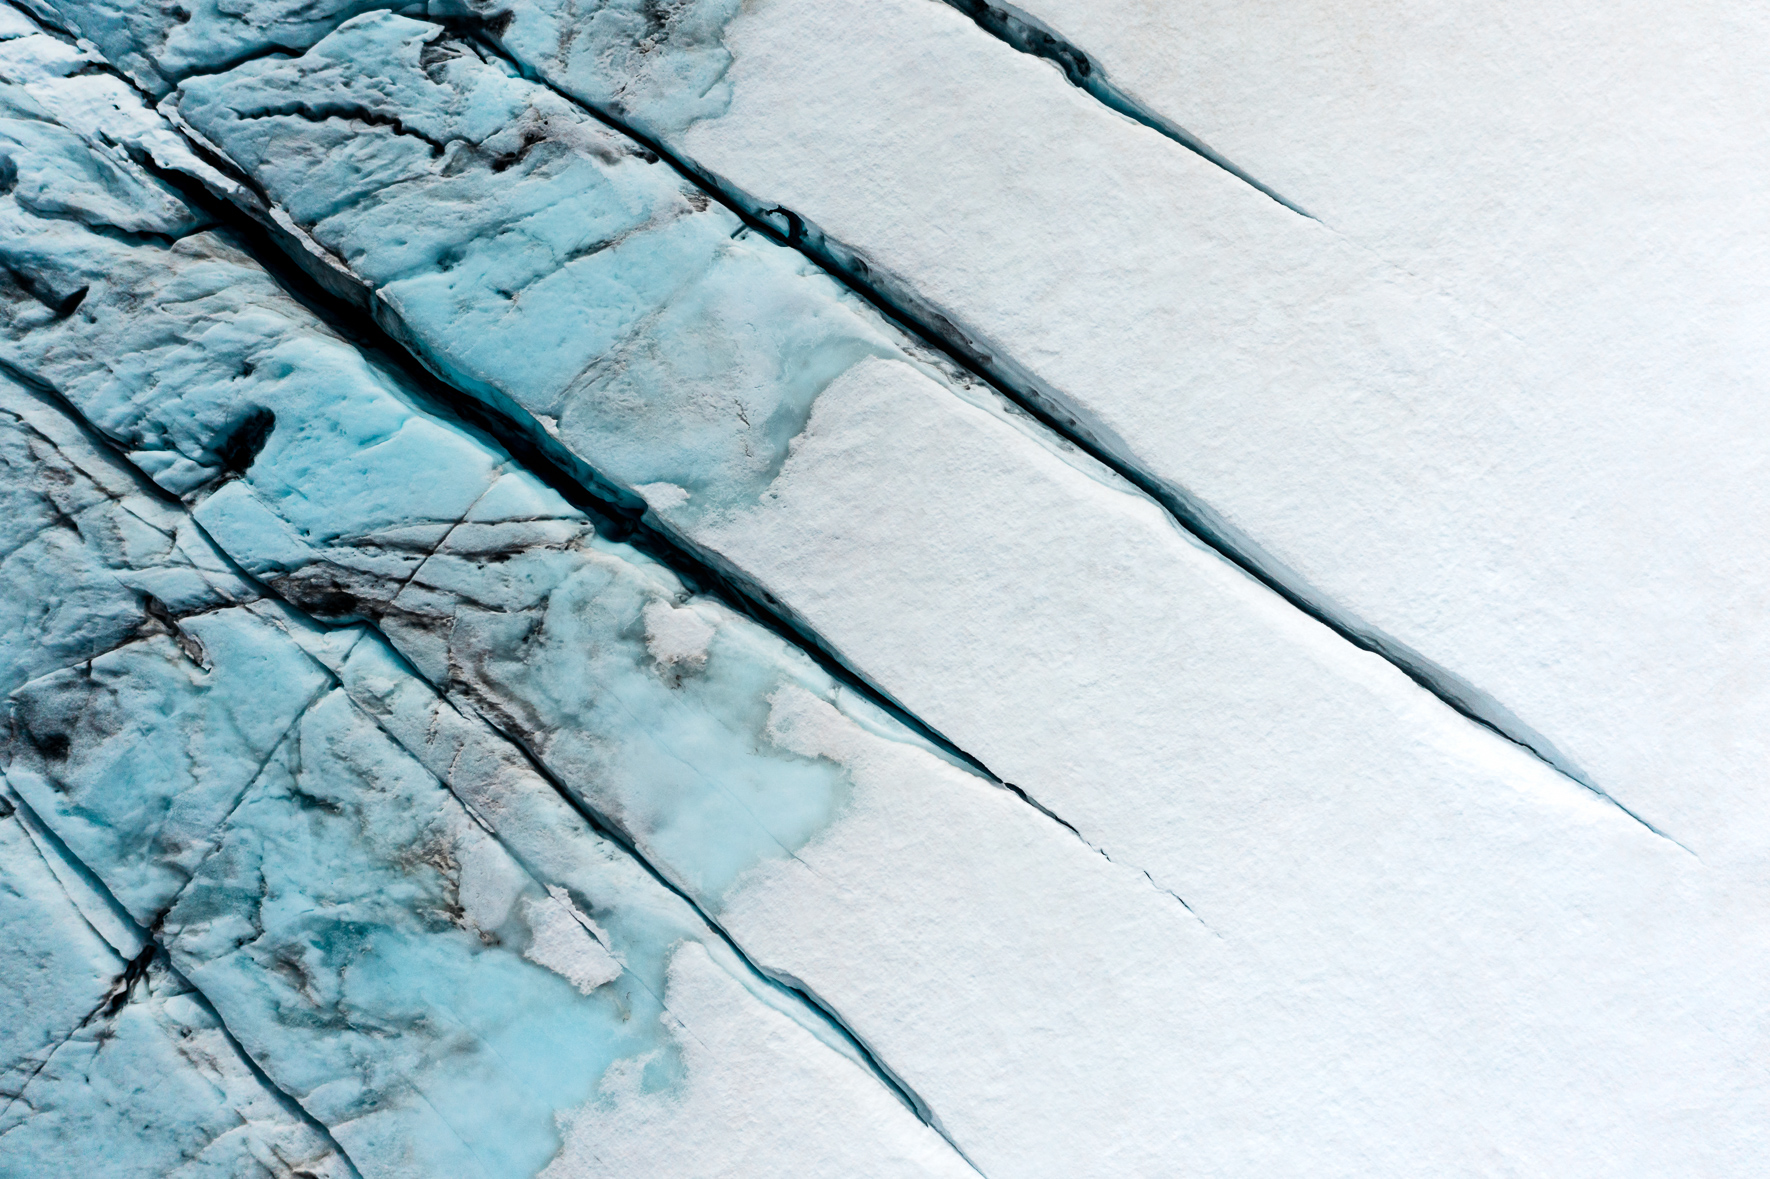 Aerial view of a snow-covered glacier in Norway with deep cracks and crevasses